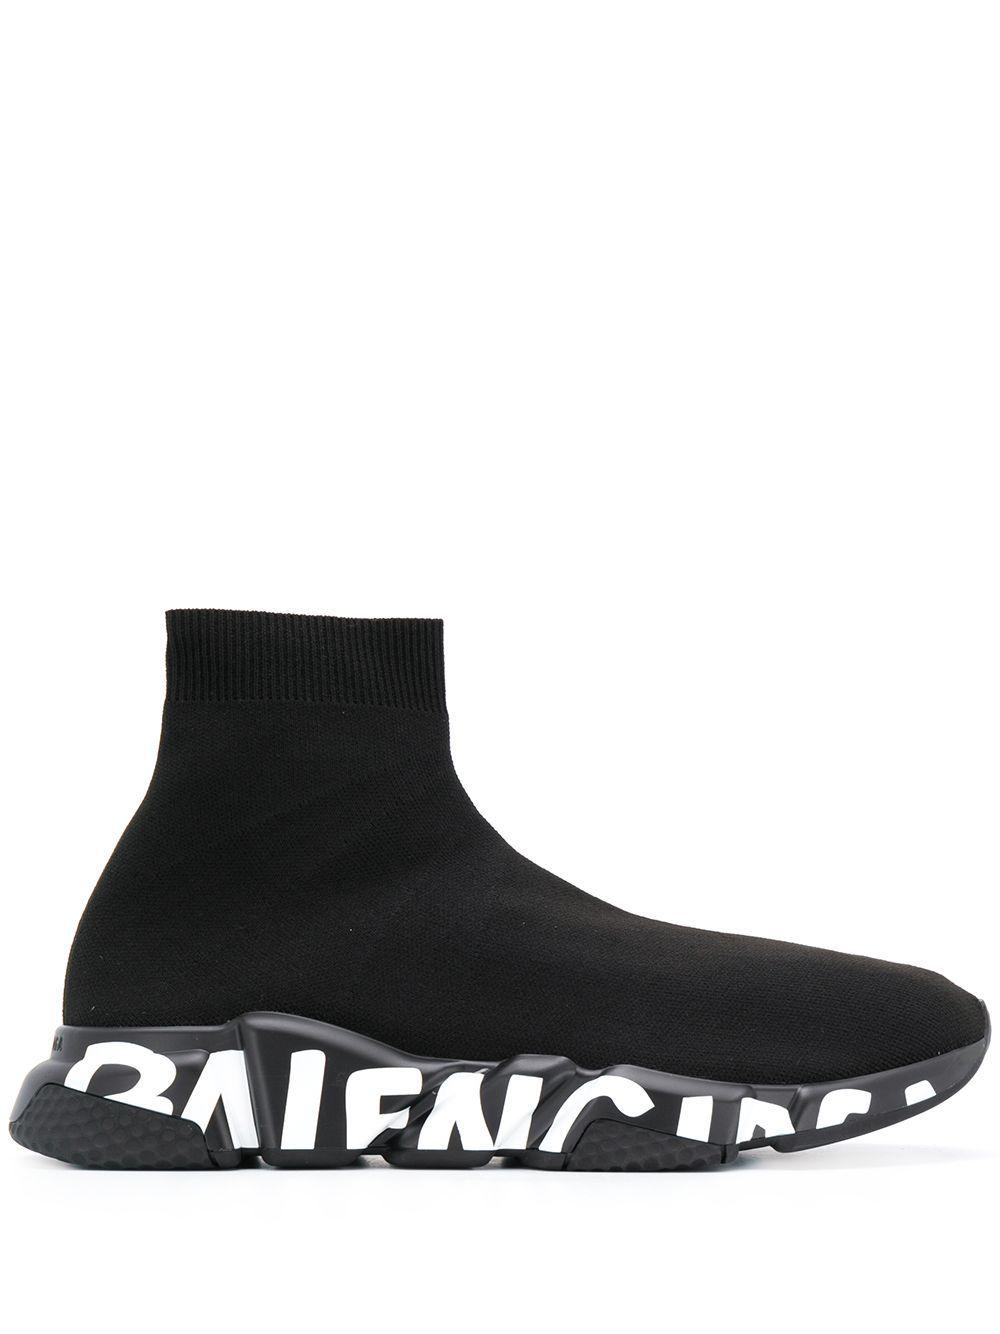 Balenciaga Synthetic Graffiti-sole Speed Sneakers in Black / White (Black)  for Men - Save 34% - Lyst